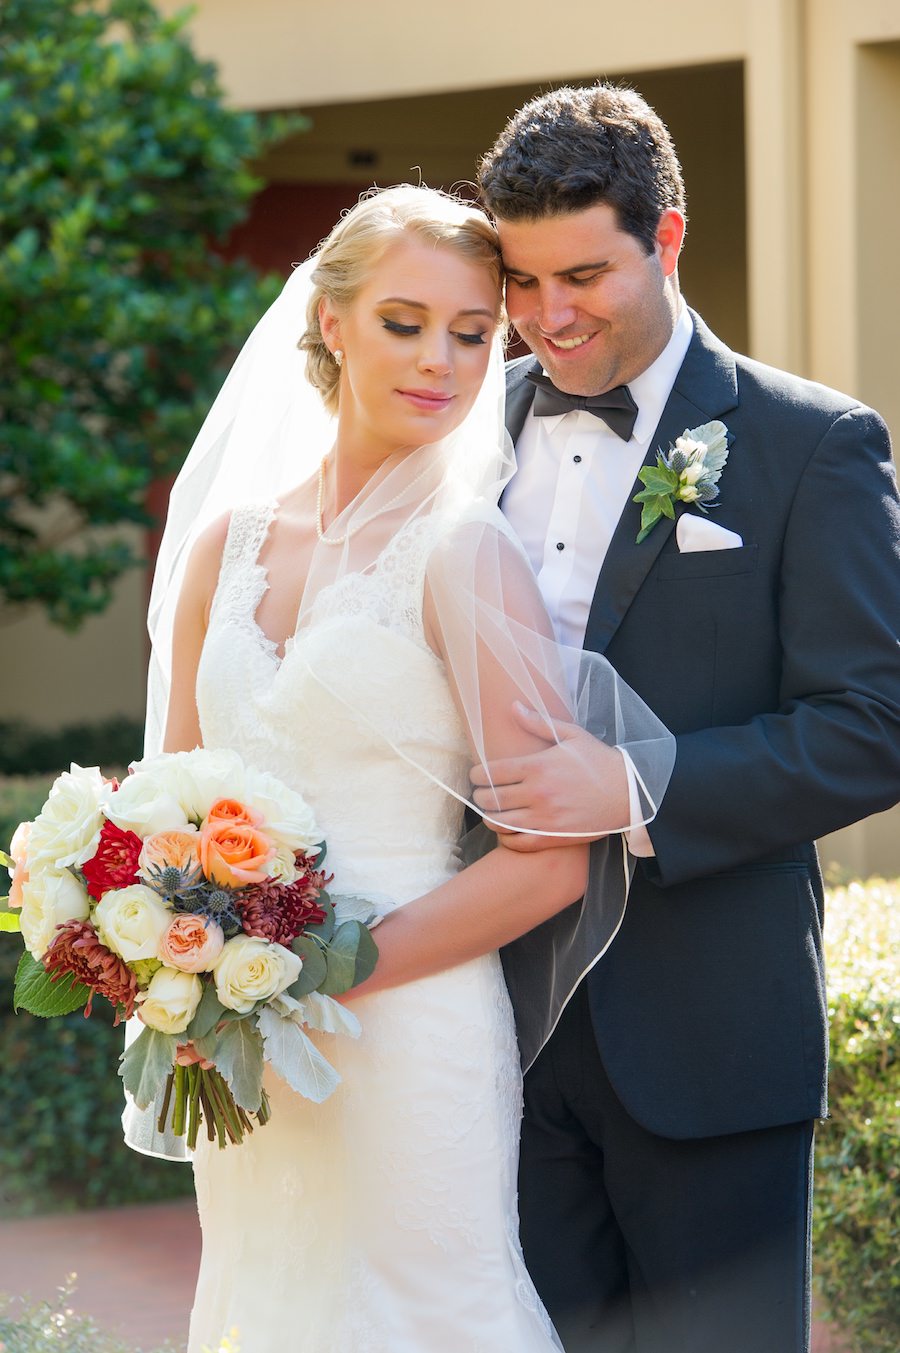 Bride and Groom Wedding Day Portrait in Lace Wedding Dress with Ivory, Red and Orange Floral Bouquet | Tampa Wedding Photographer Andi Diamond Photography